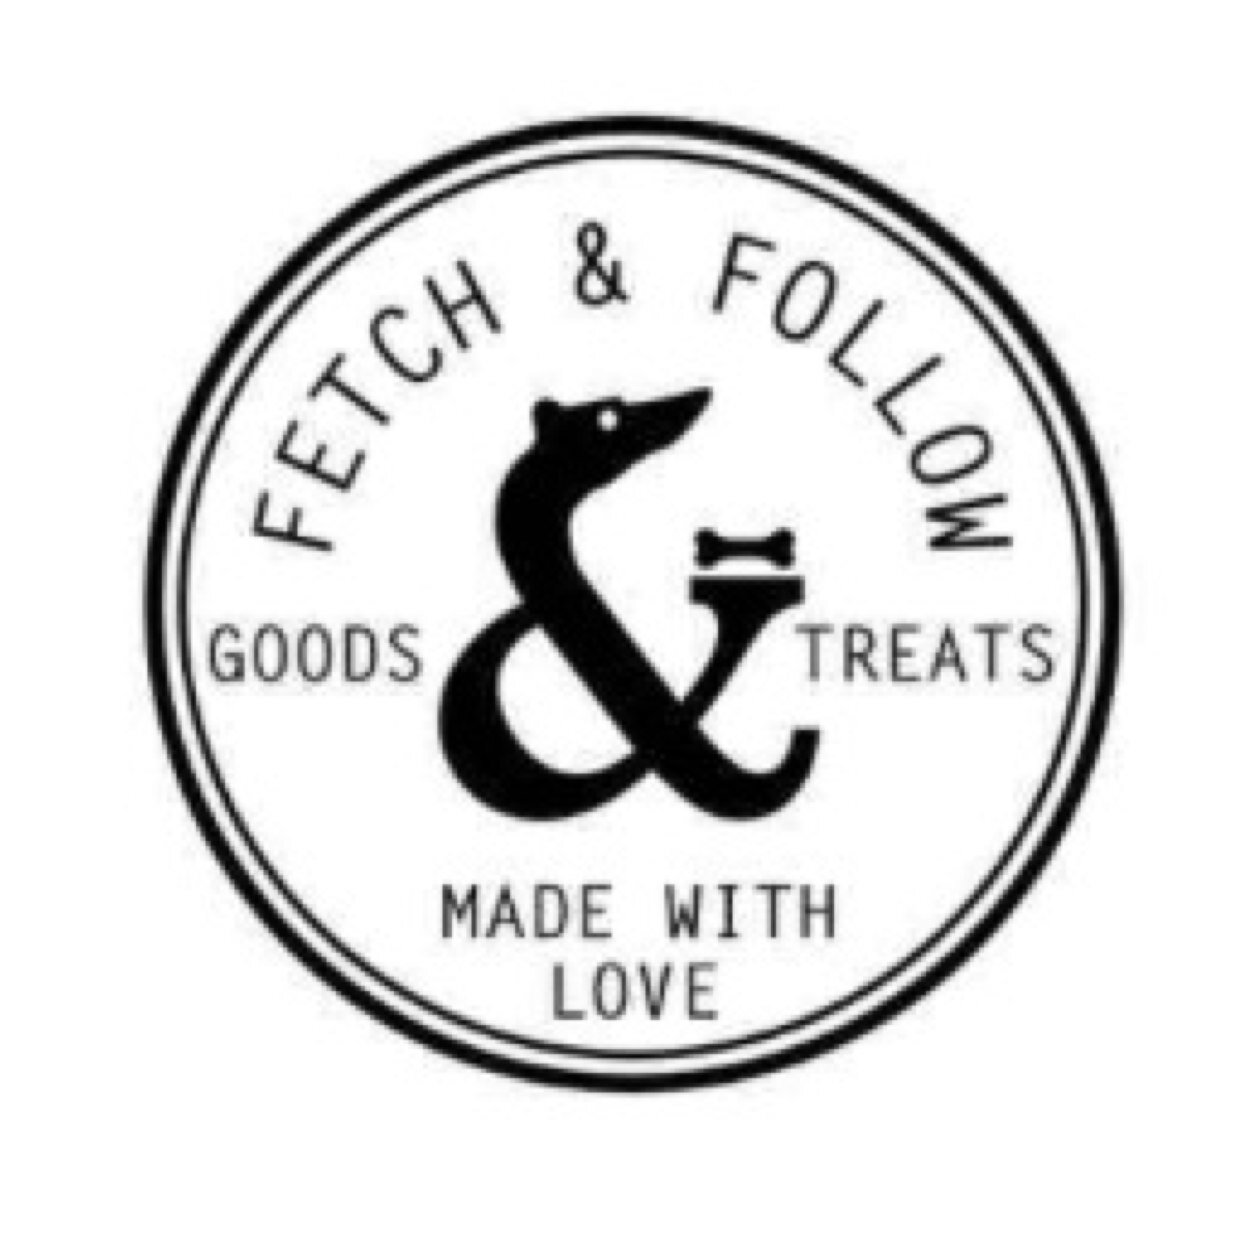 Fetch & Follow's ethos is to offer dog owners items which where possible are natural, organic & eco friendly through thoughtfully designed products & packaging